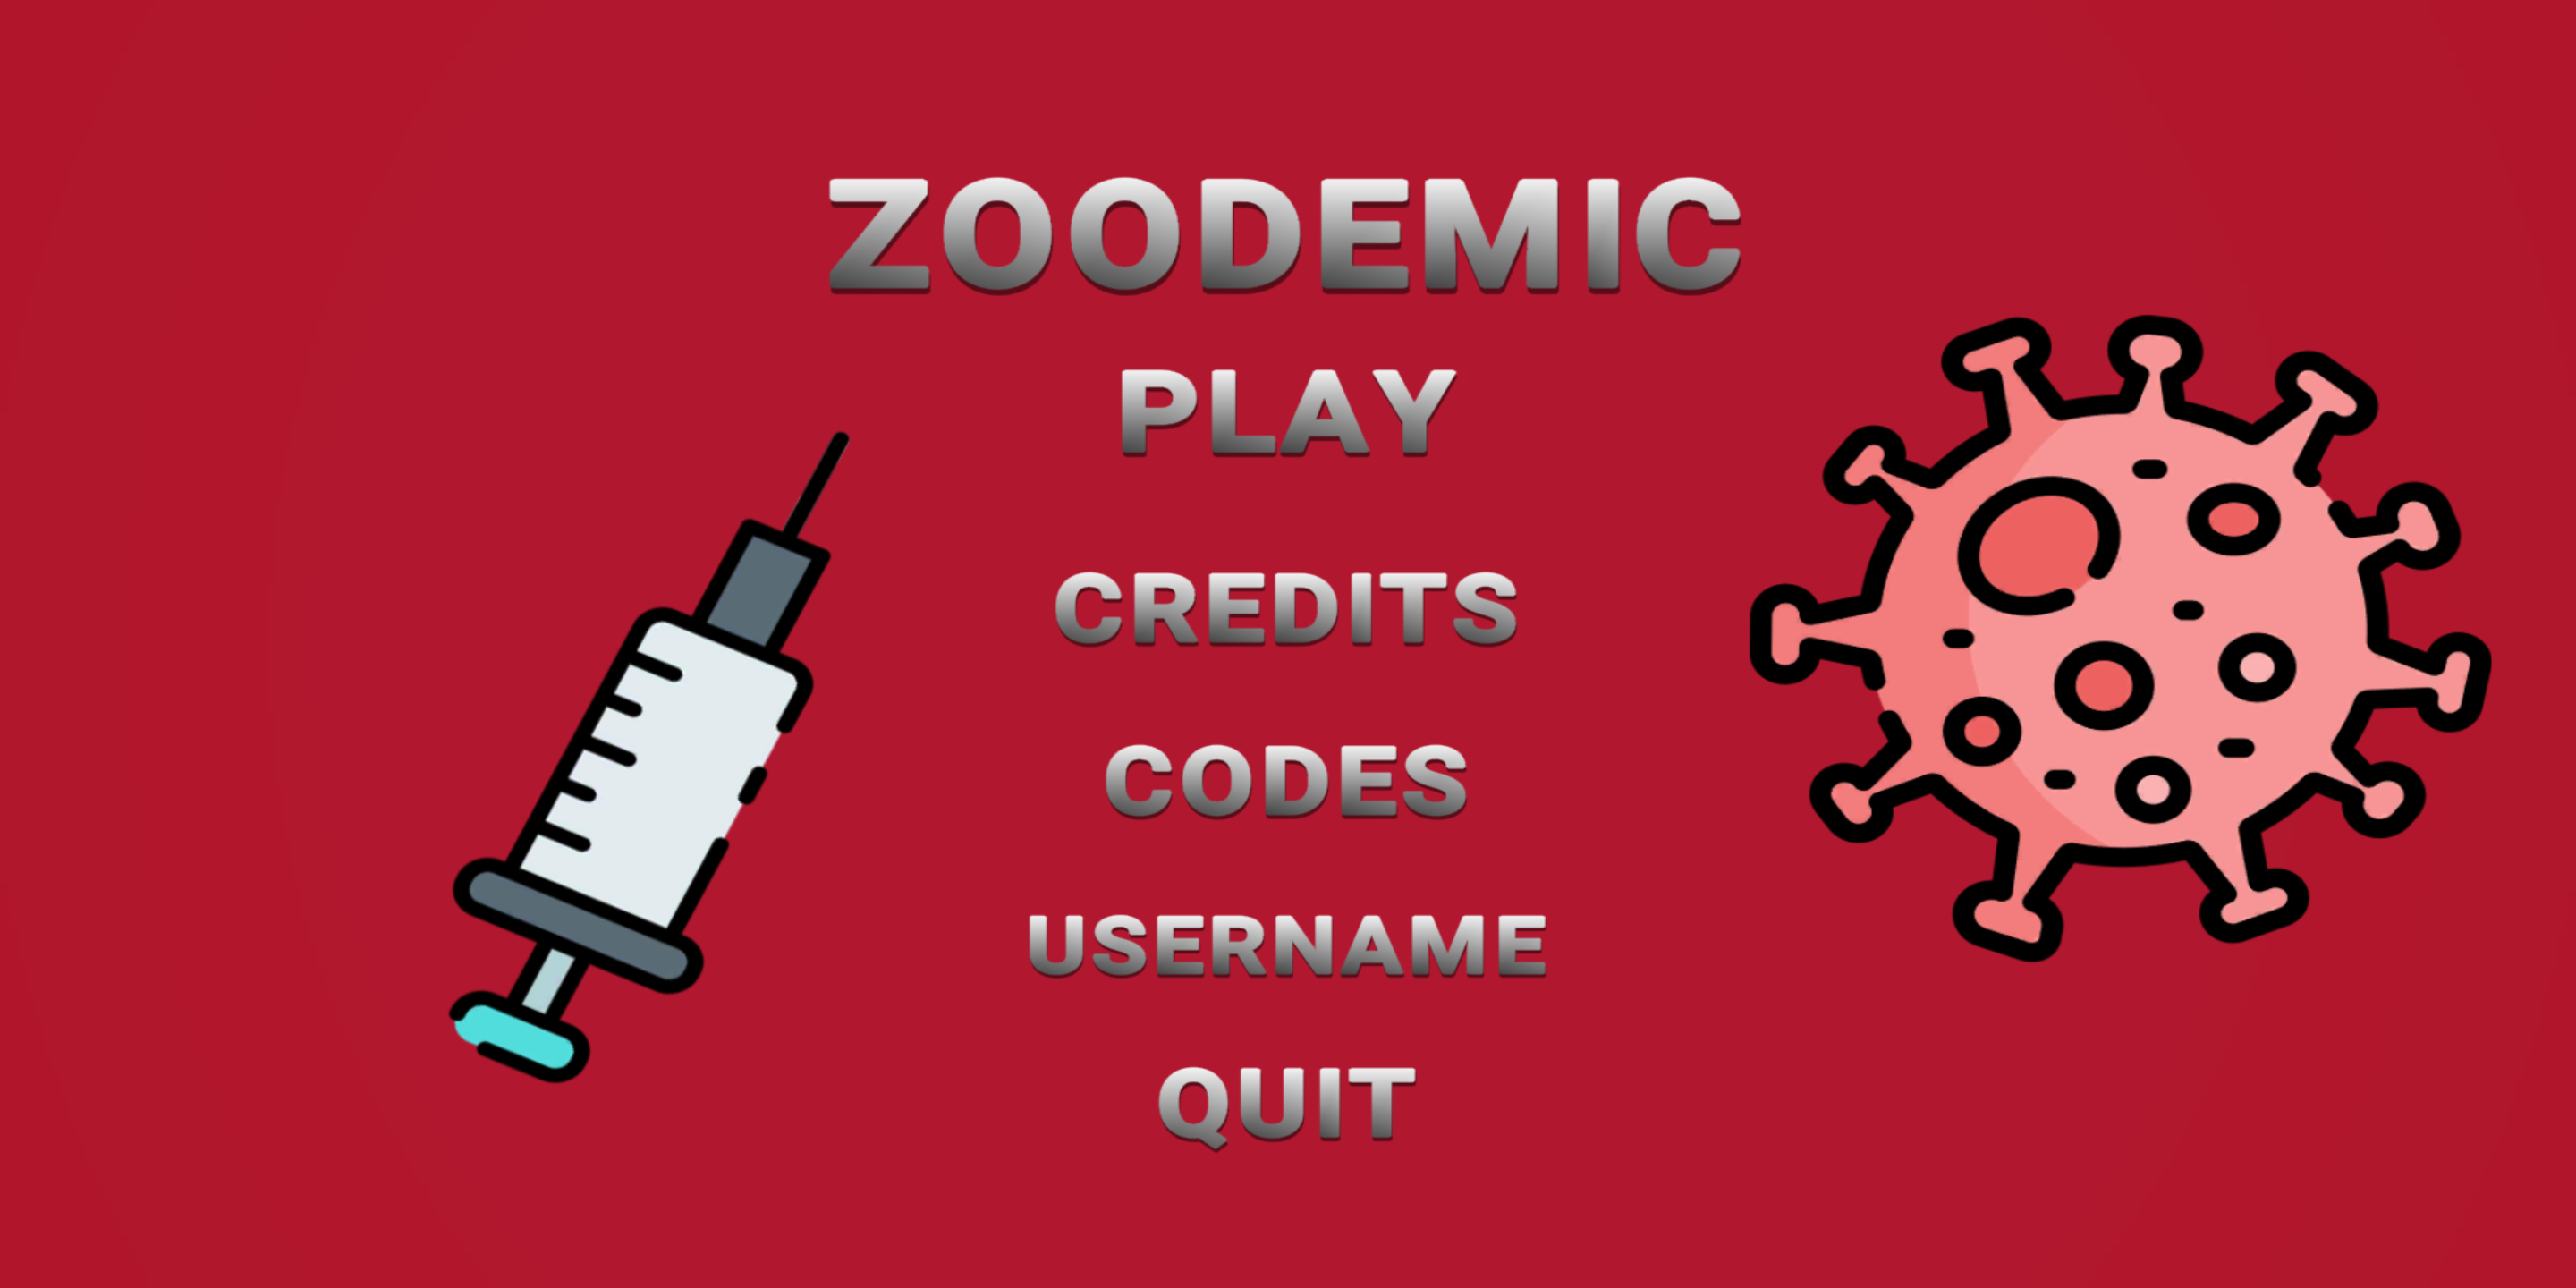 zoodemic_20210114-205645.png